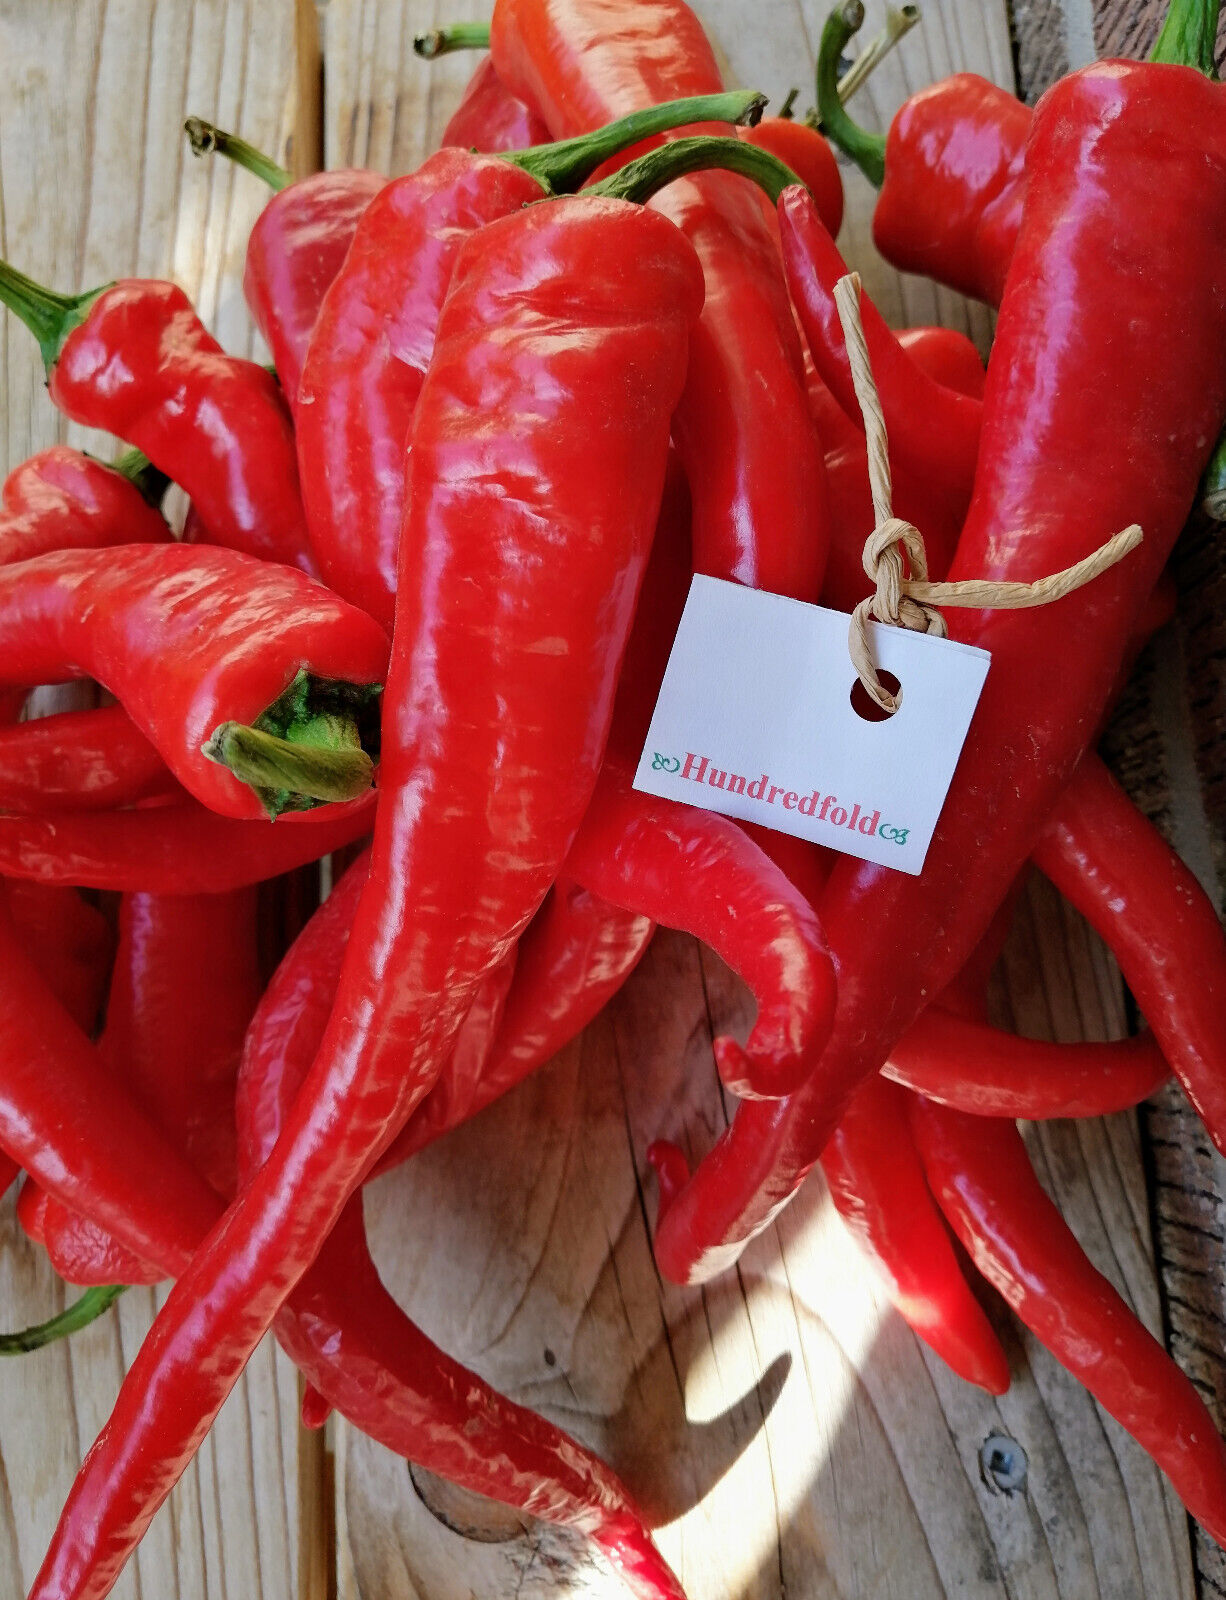 Hundredfold Long Red Narrow Cayenne Hot Pepper 50 Vegetable Seeds - Capsicum annuum, Medium Hot, Heirloom Non-GMO, Canada Shipped